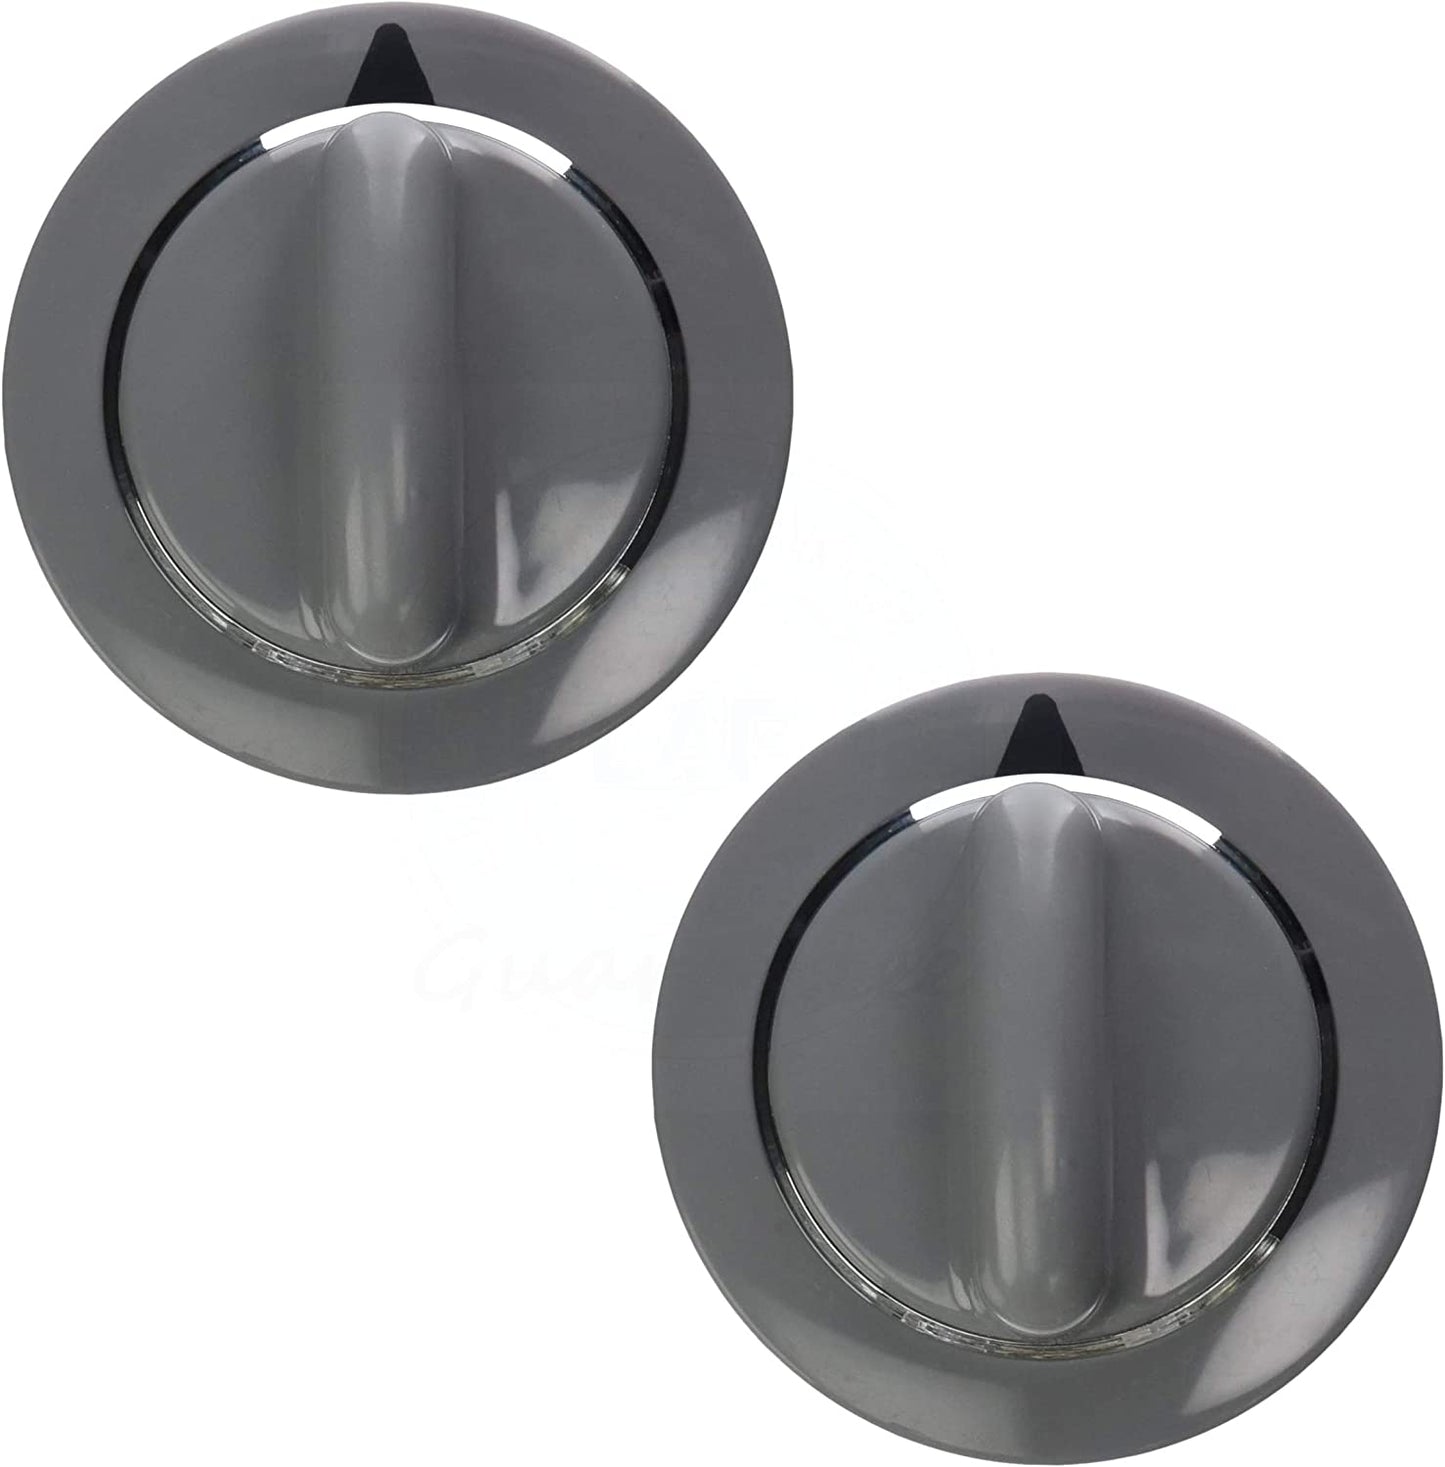 Lifetime Appliance (2 PACK) WE1M964 Timer Knob with Metal Ring Compatible with General Electric Dryer